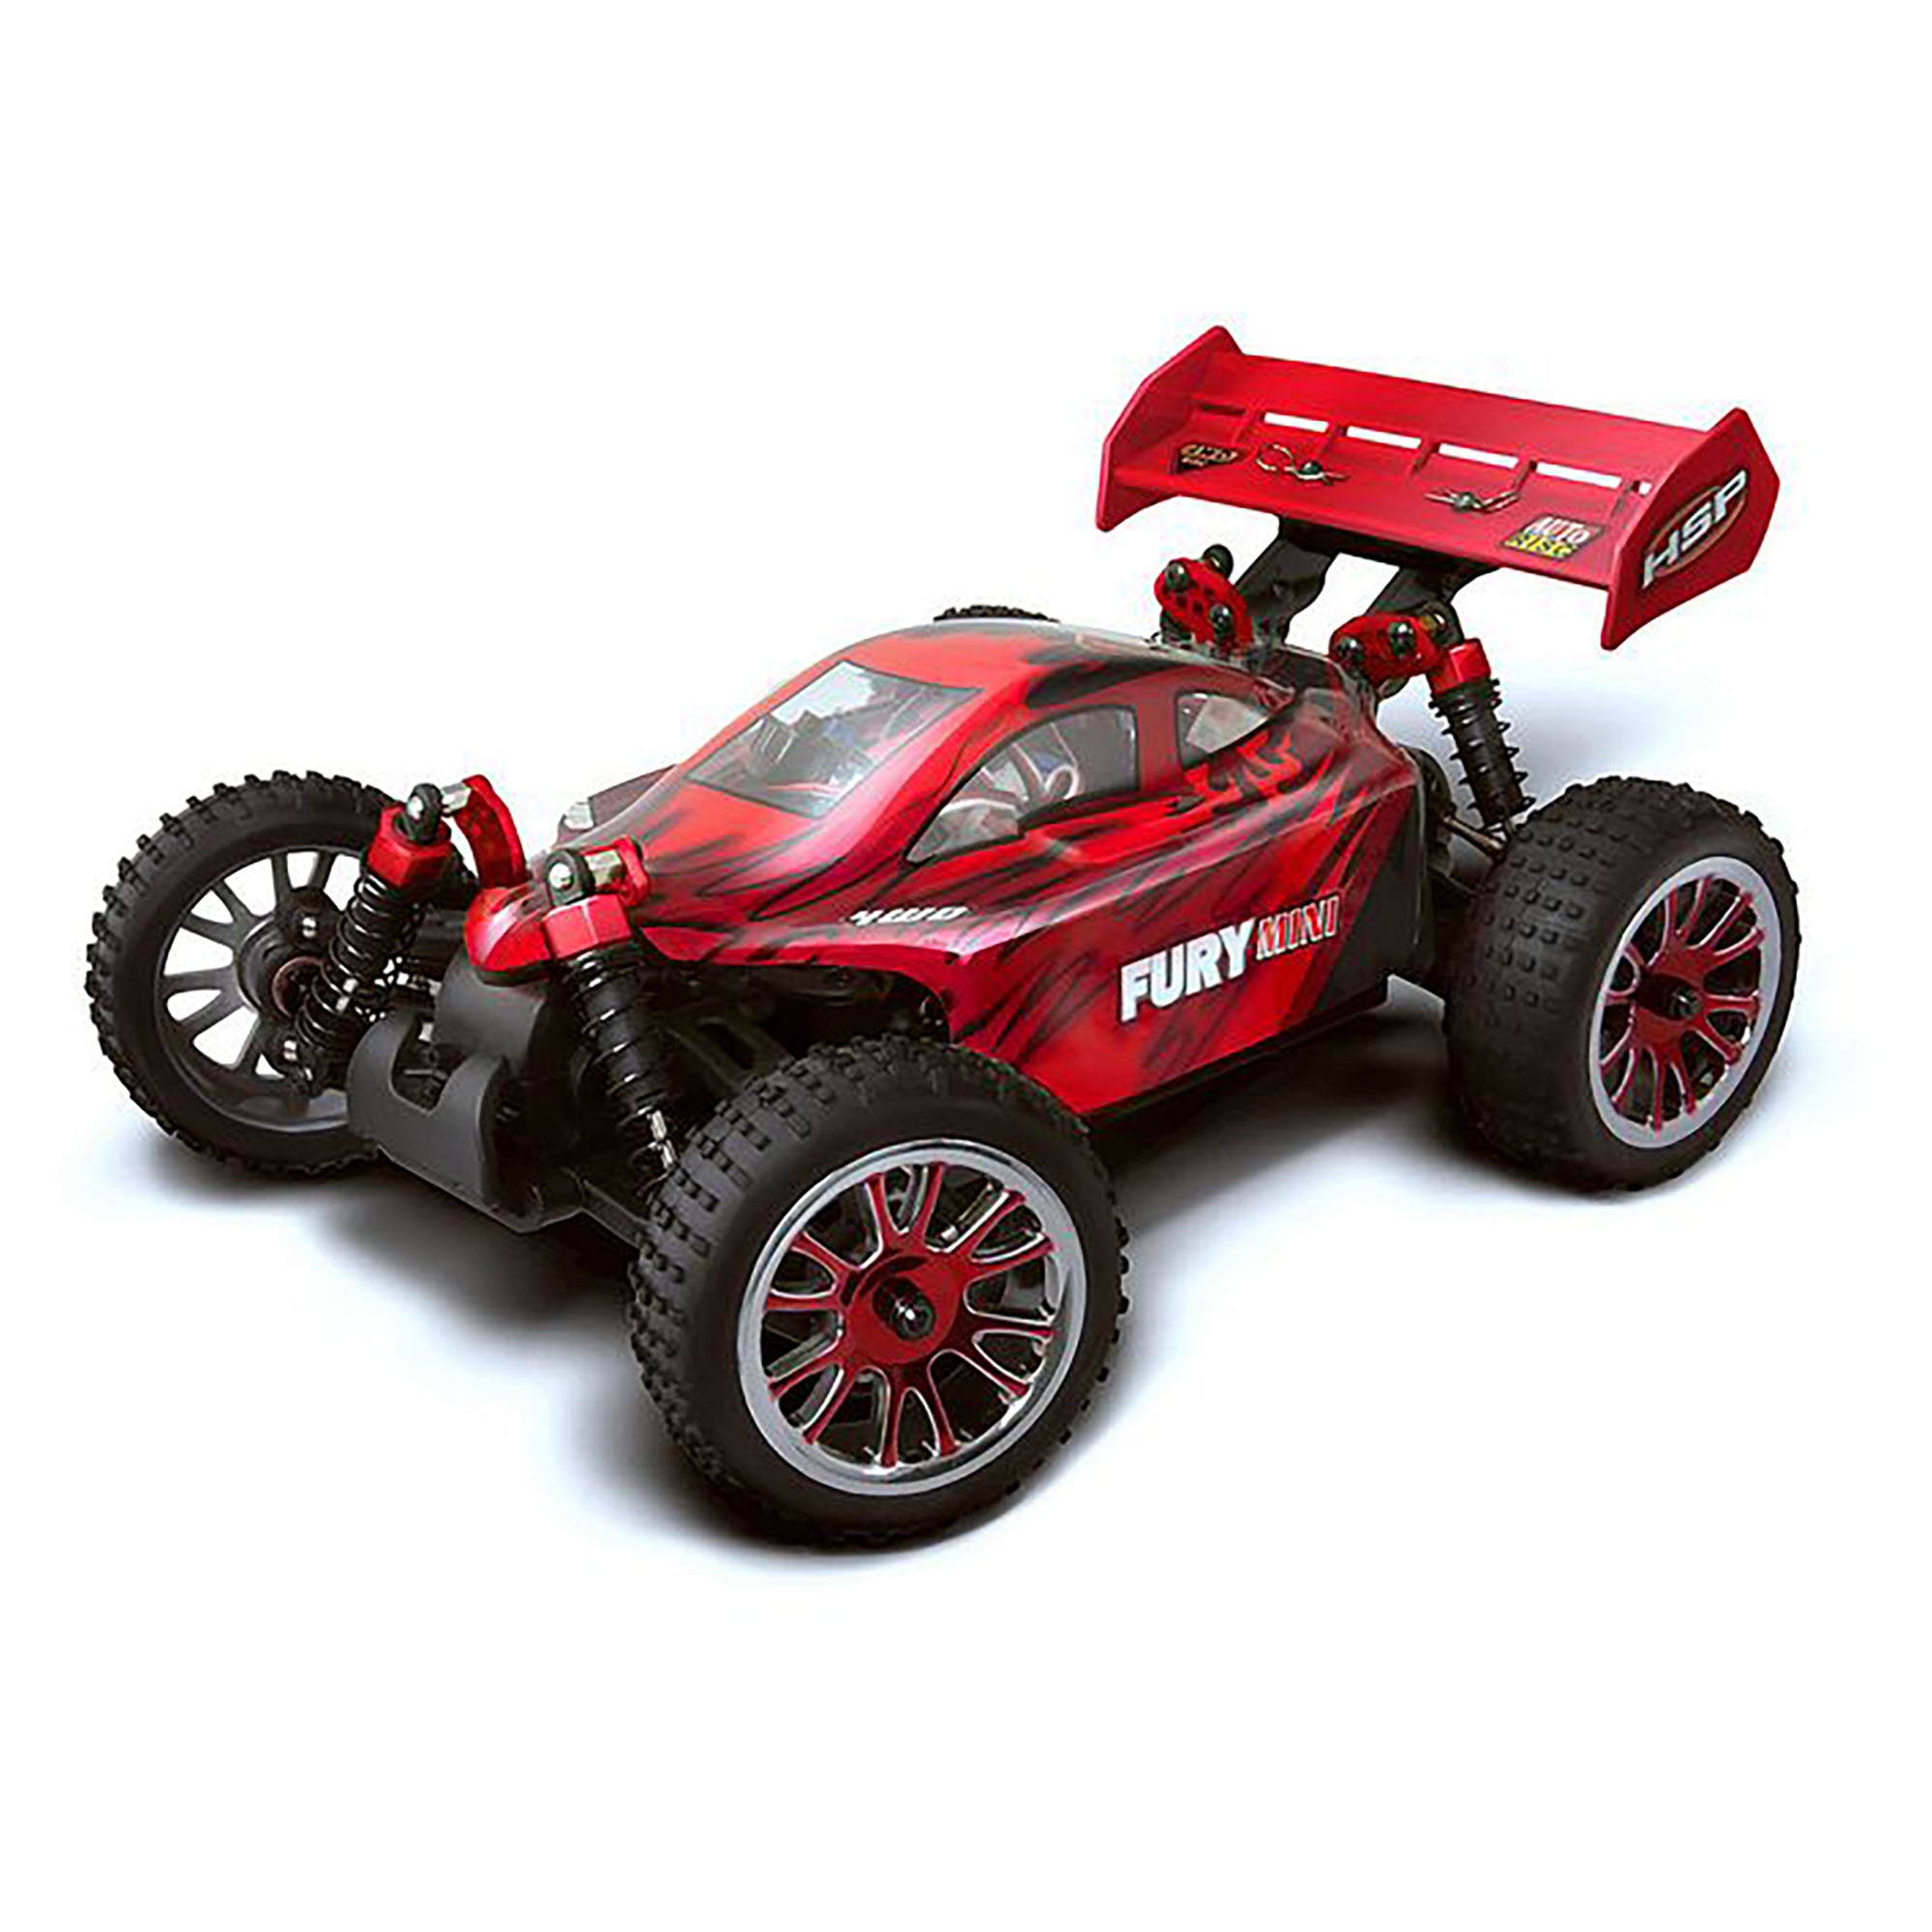 HSP Racing 94185-88802 Fury Mini 2.4Ghz Electric 4WD Off Road RTR 1/16 Scale RC Buggy